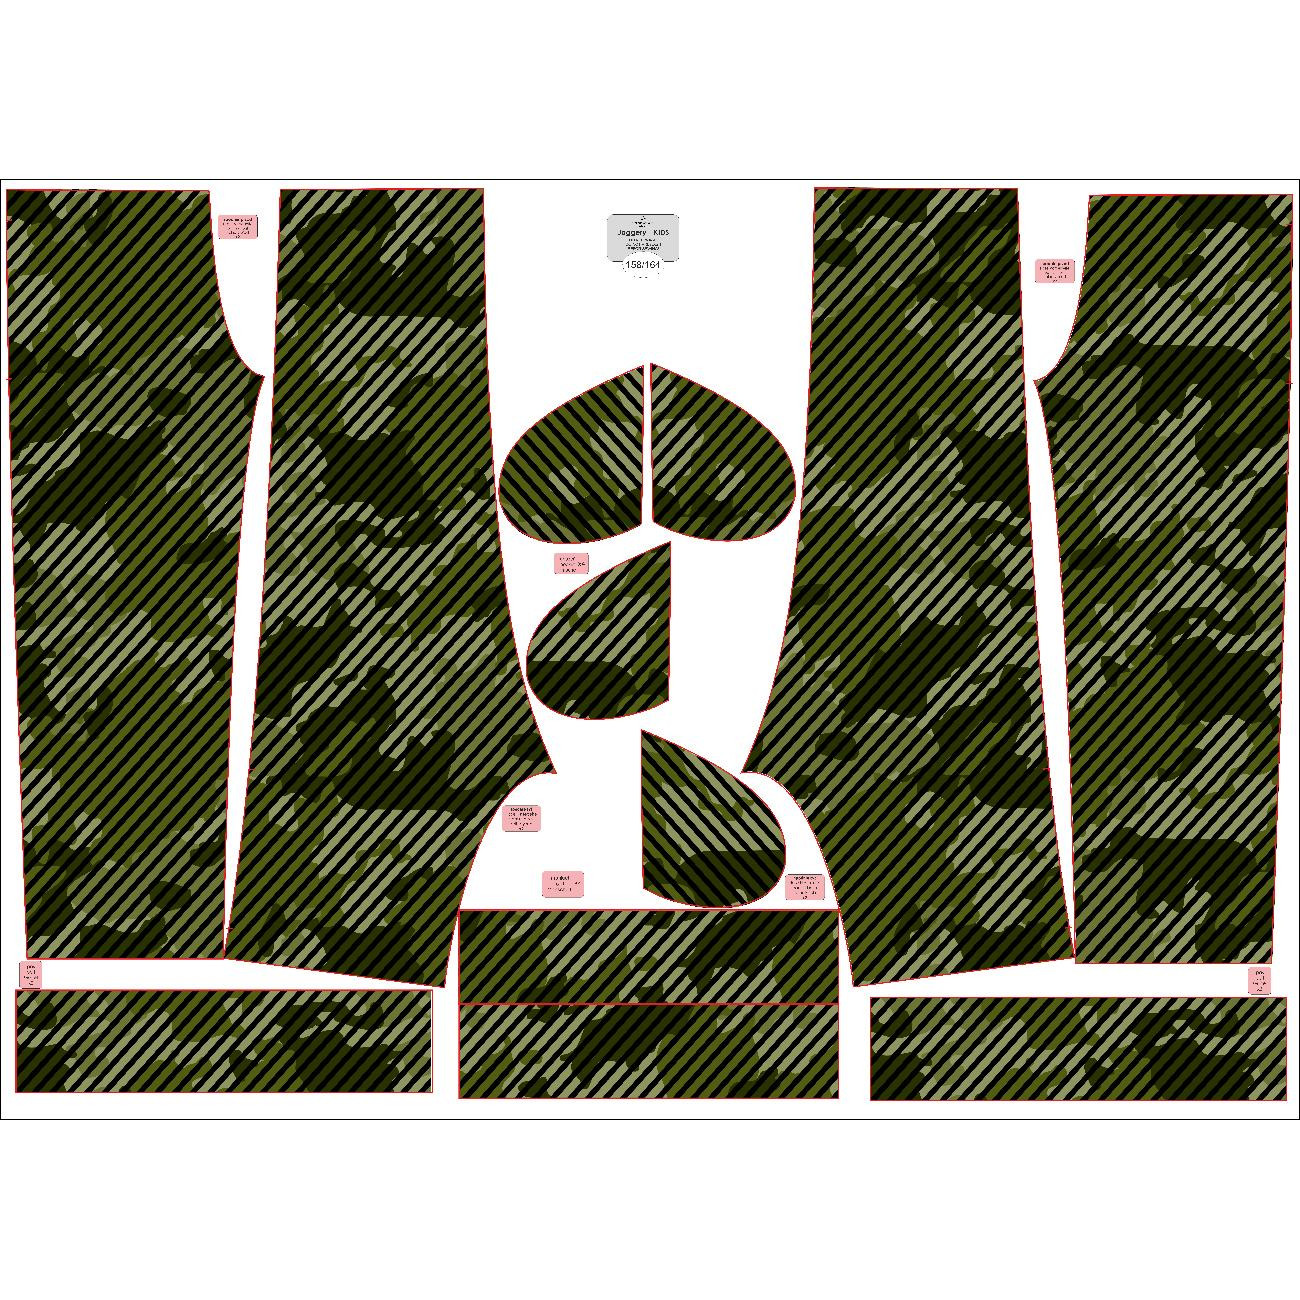 KID'S JOGGERS (ROBIN) - CAMOUFLAGE / STRIPES - sewing set